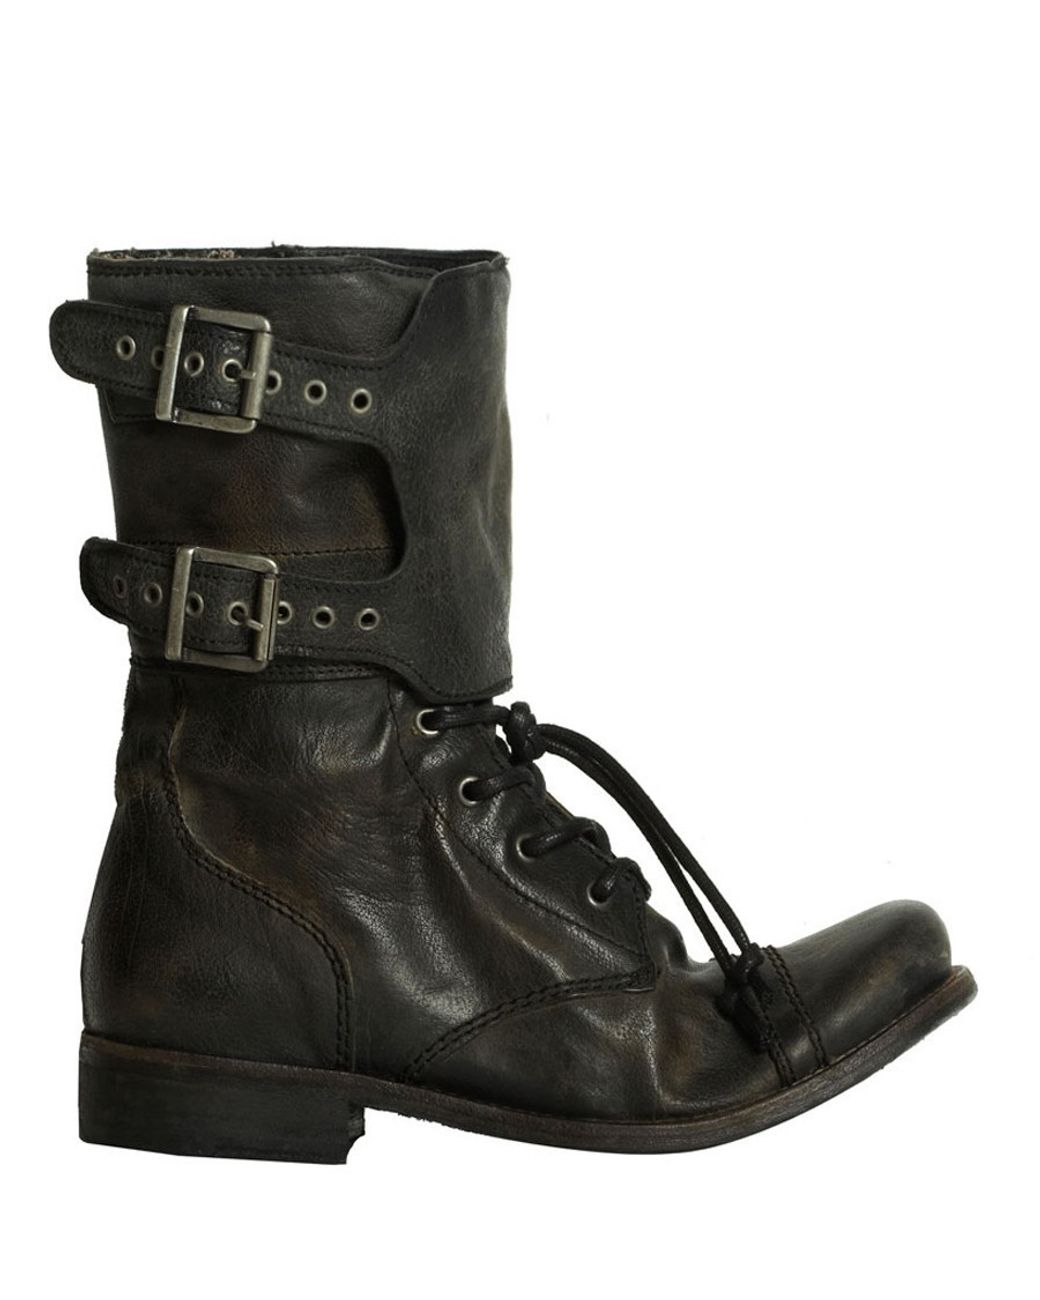 AllSaints Damisi Boots in Black | Lyst